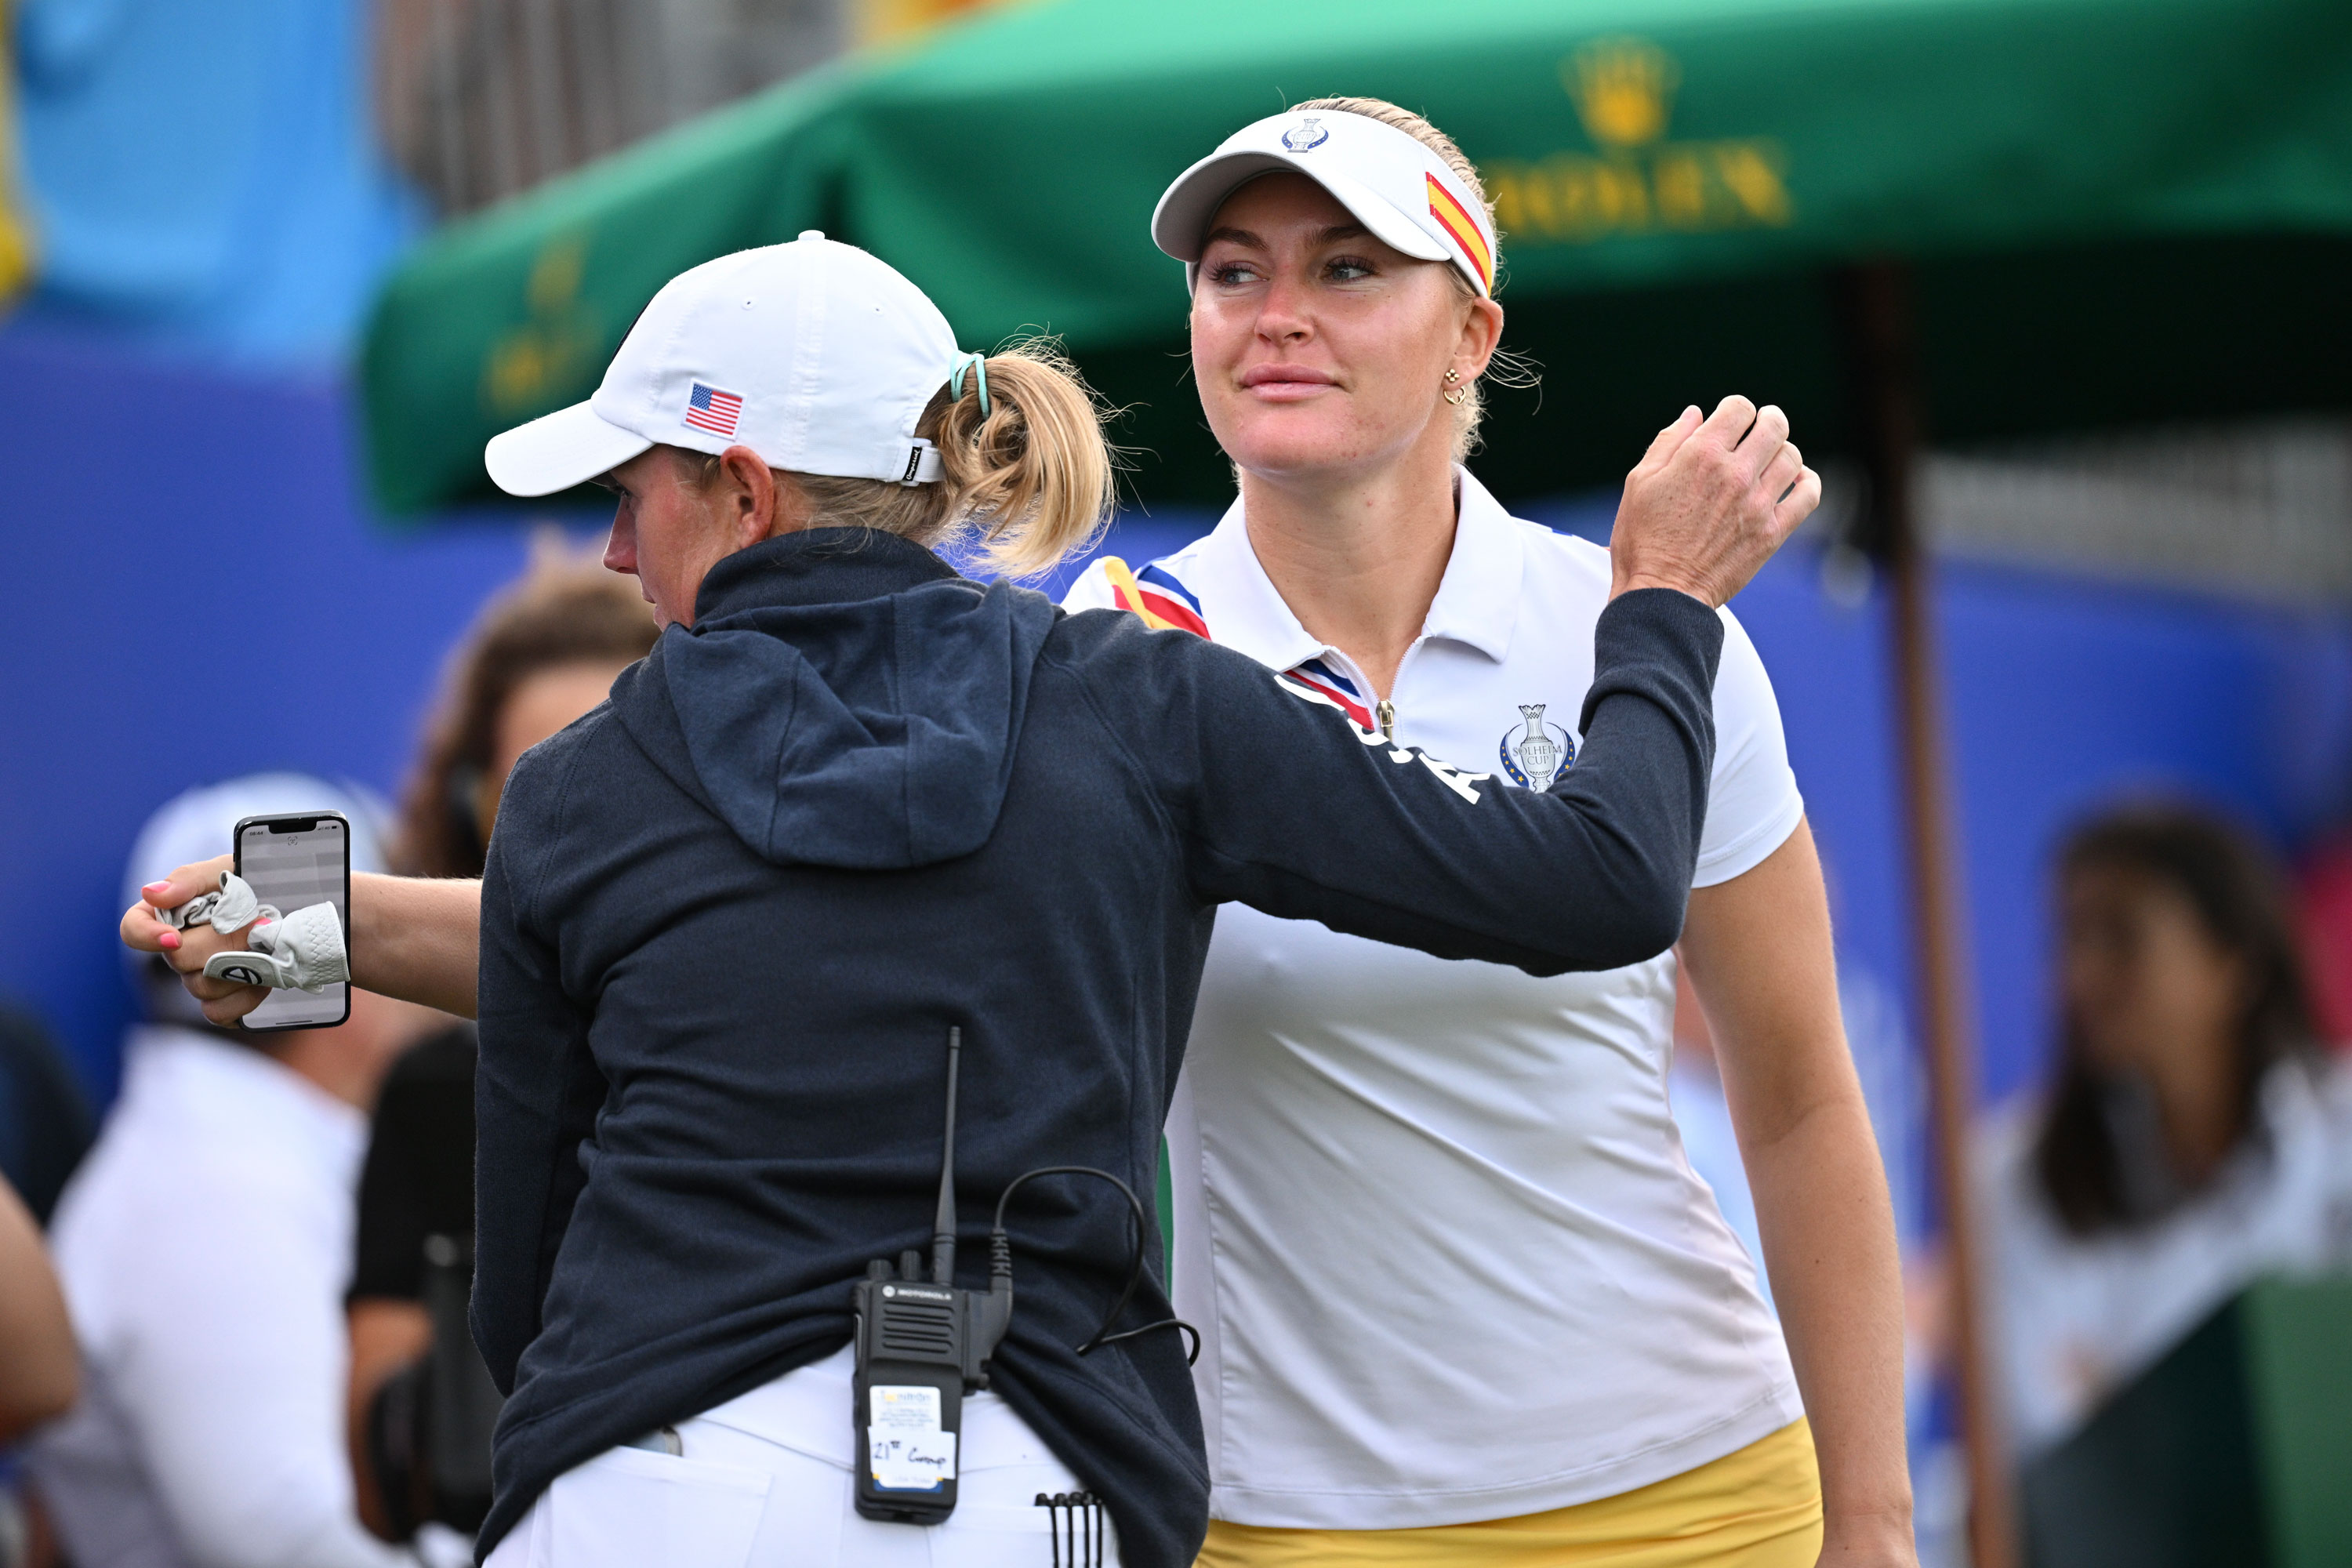 Exploring the reason behind “ducks” on Team USA's Solheim Cup bags